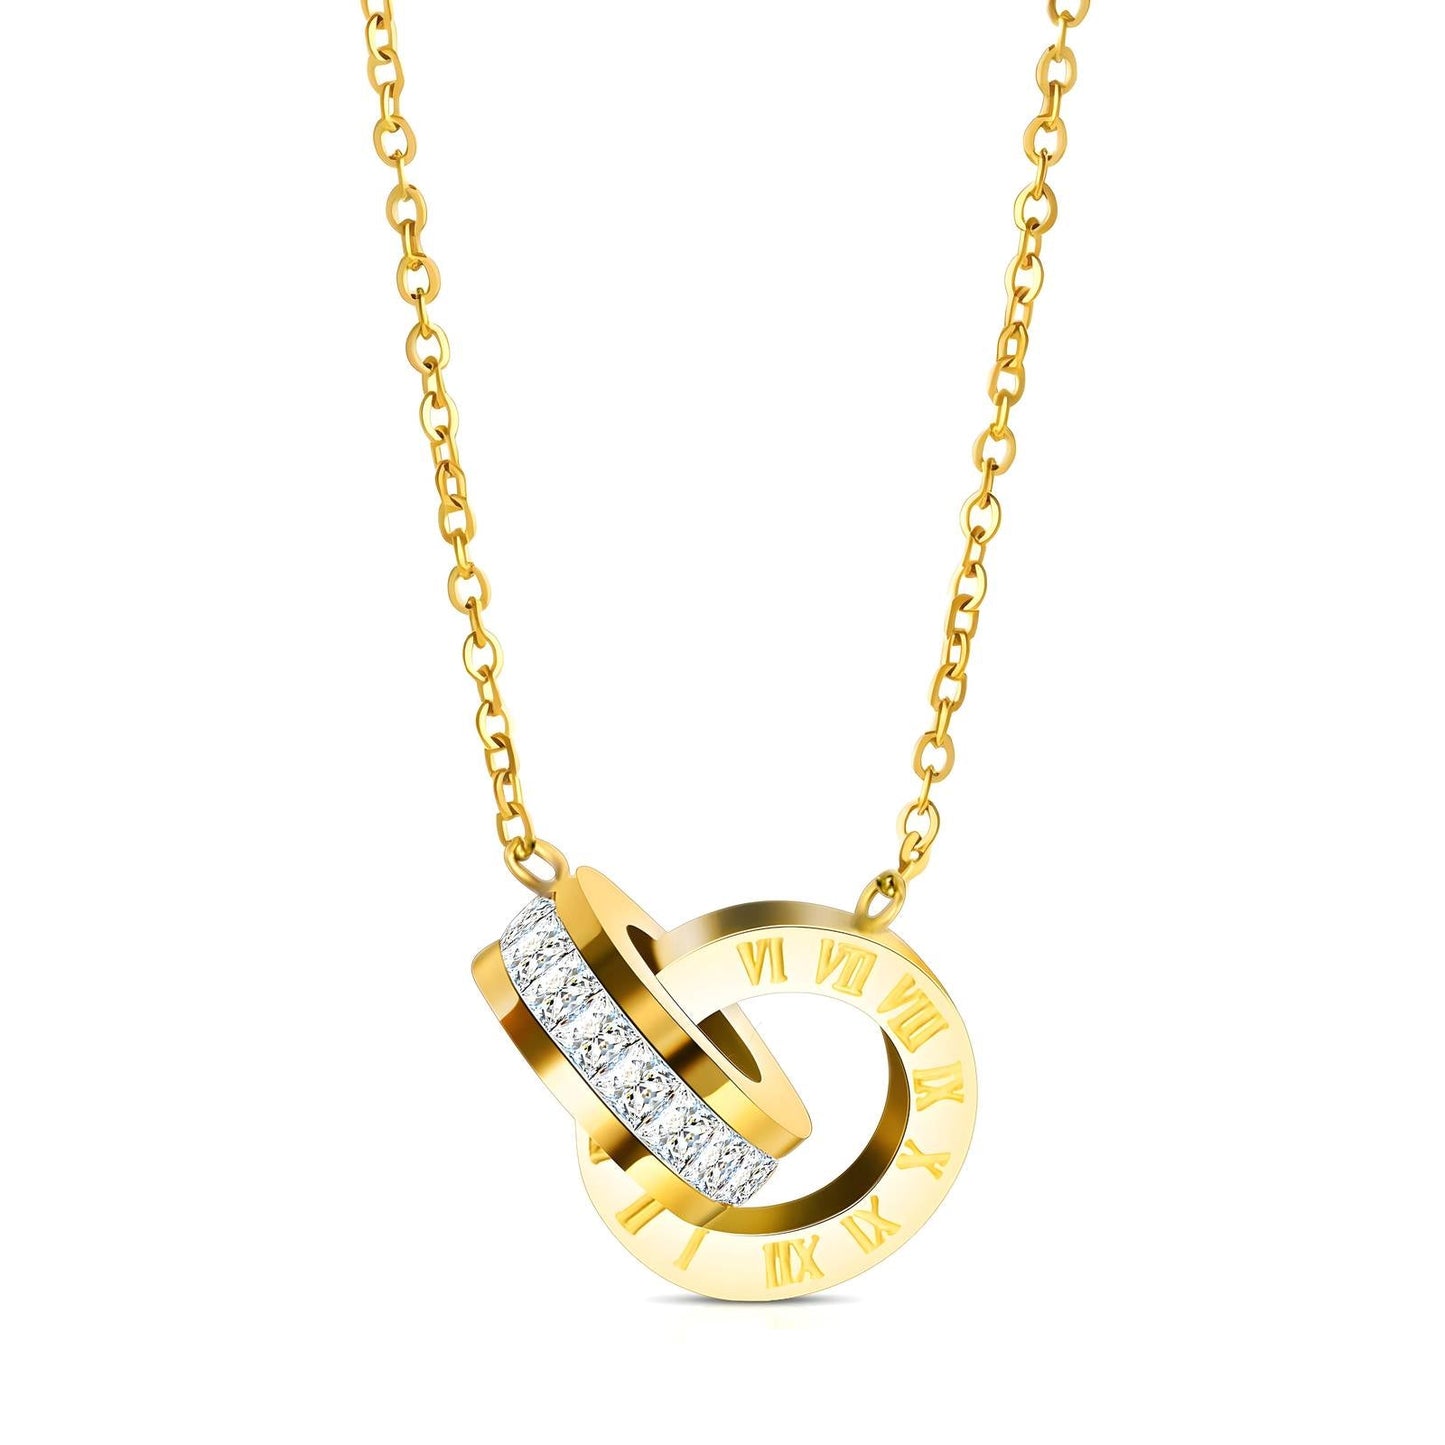 Rings on time gold necklace - Gold Plated Tarnish Free Jewellery